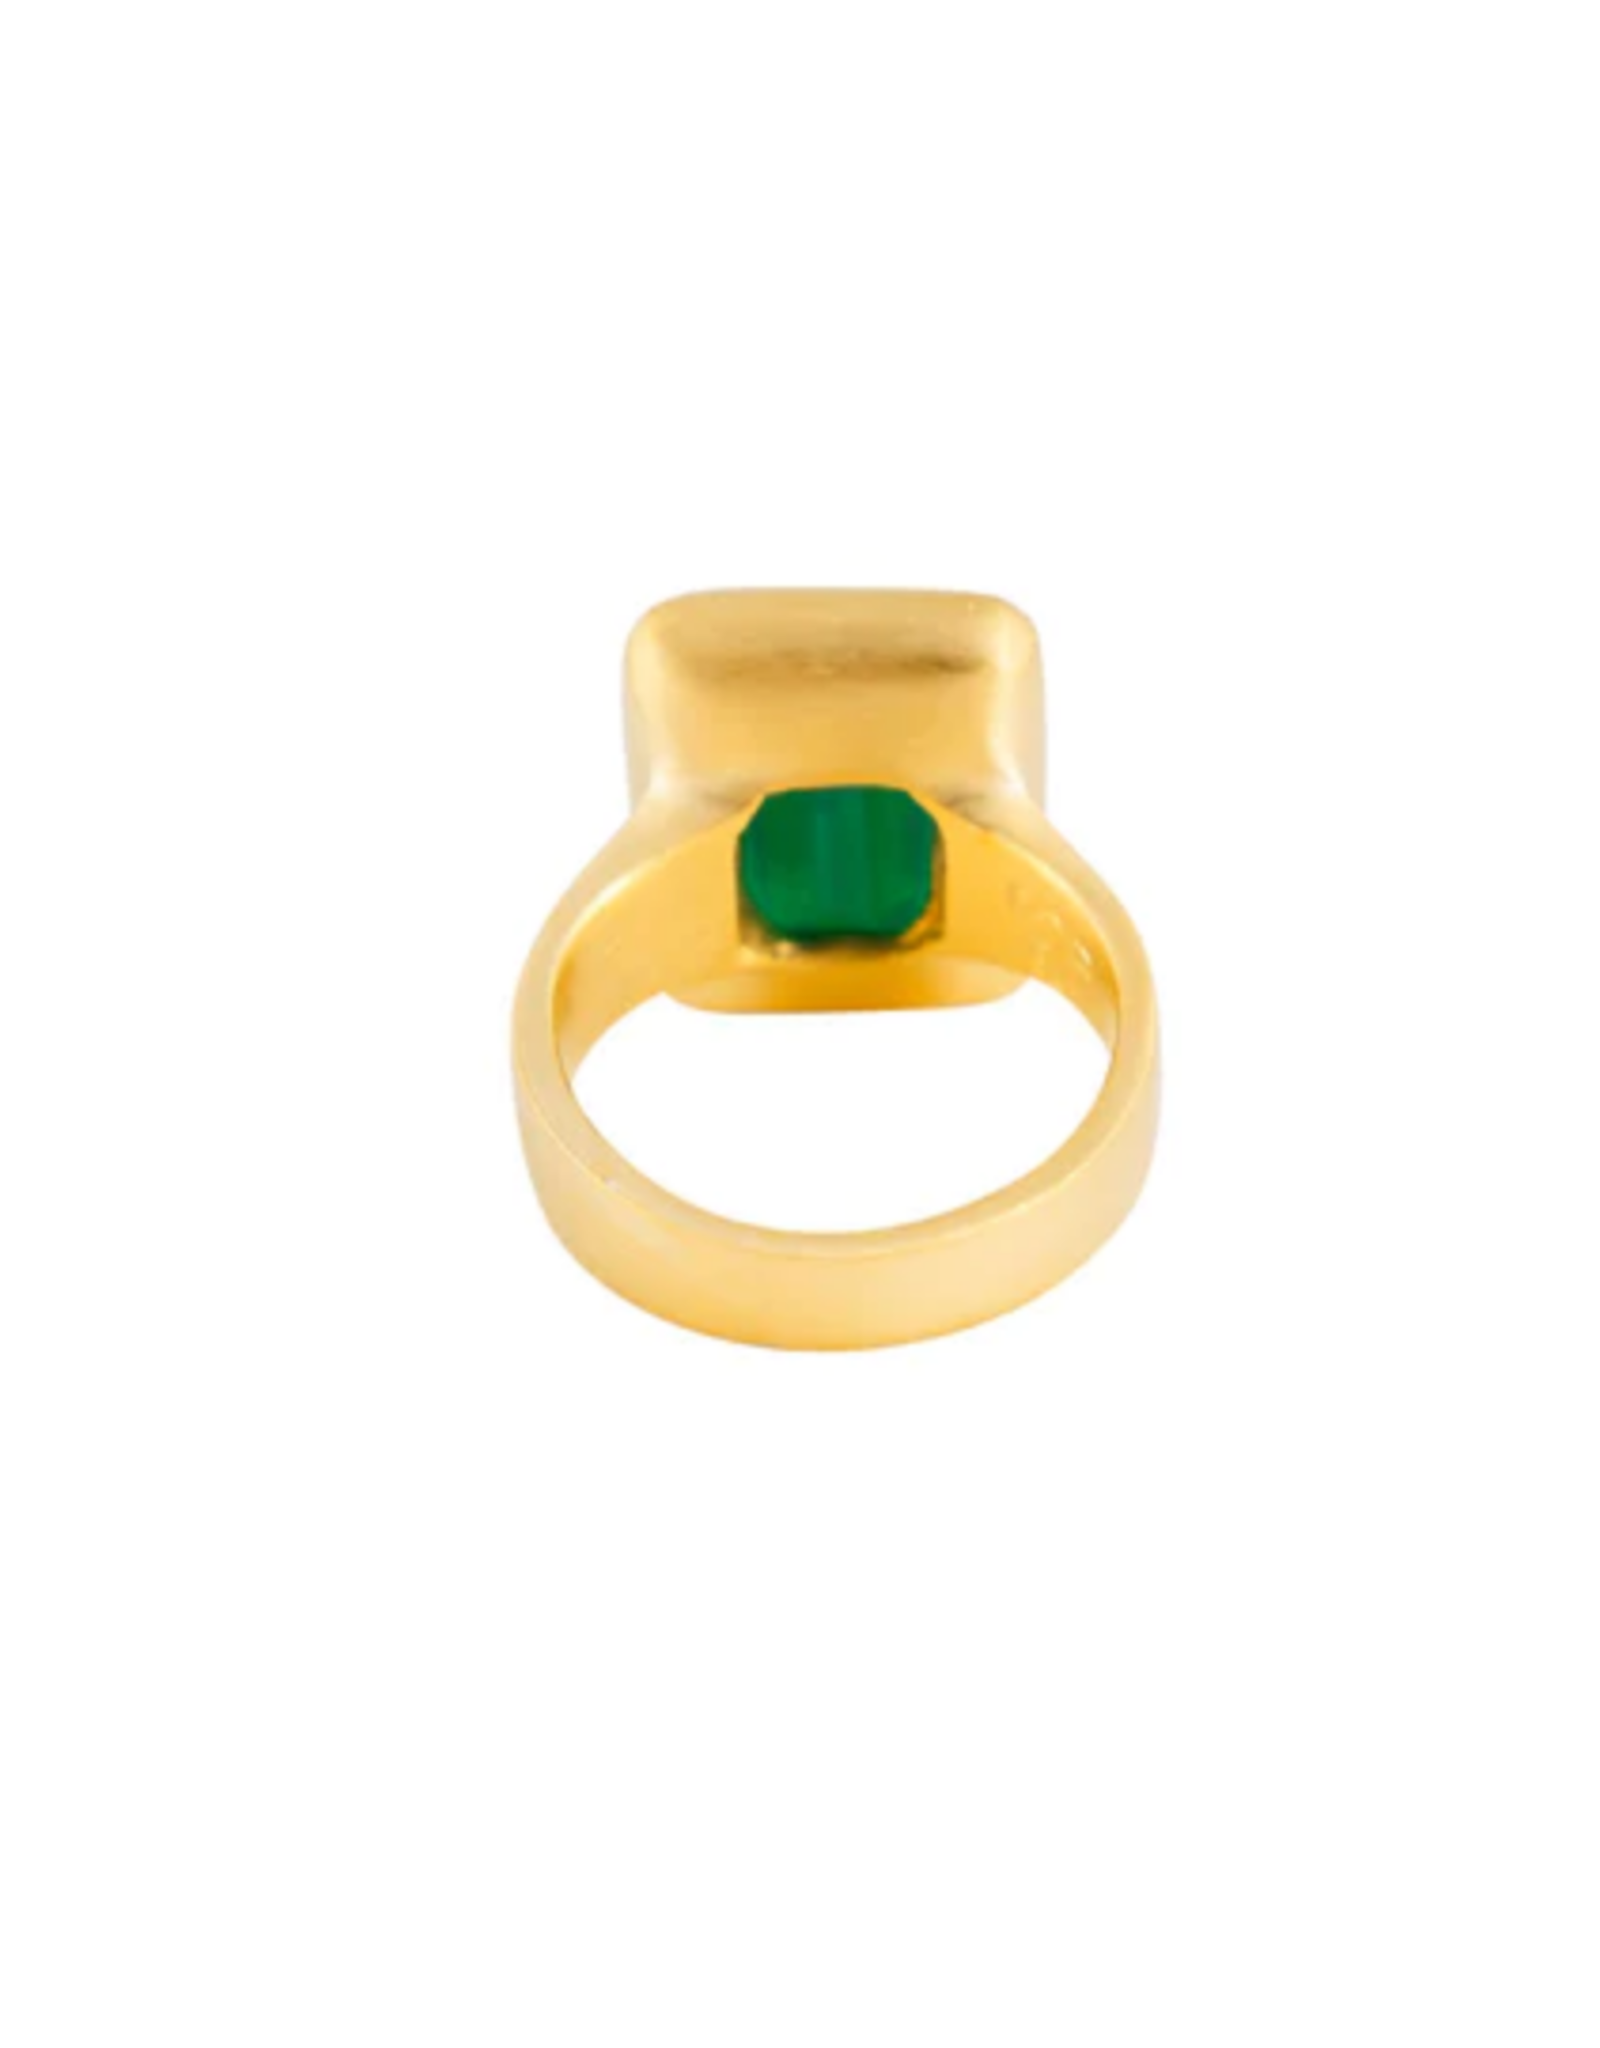 FAIRLEY GREEN AGATE DECO COCKTAIL RING SIZE 8